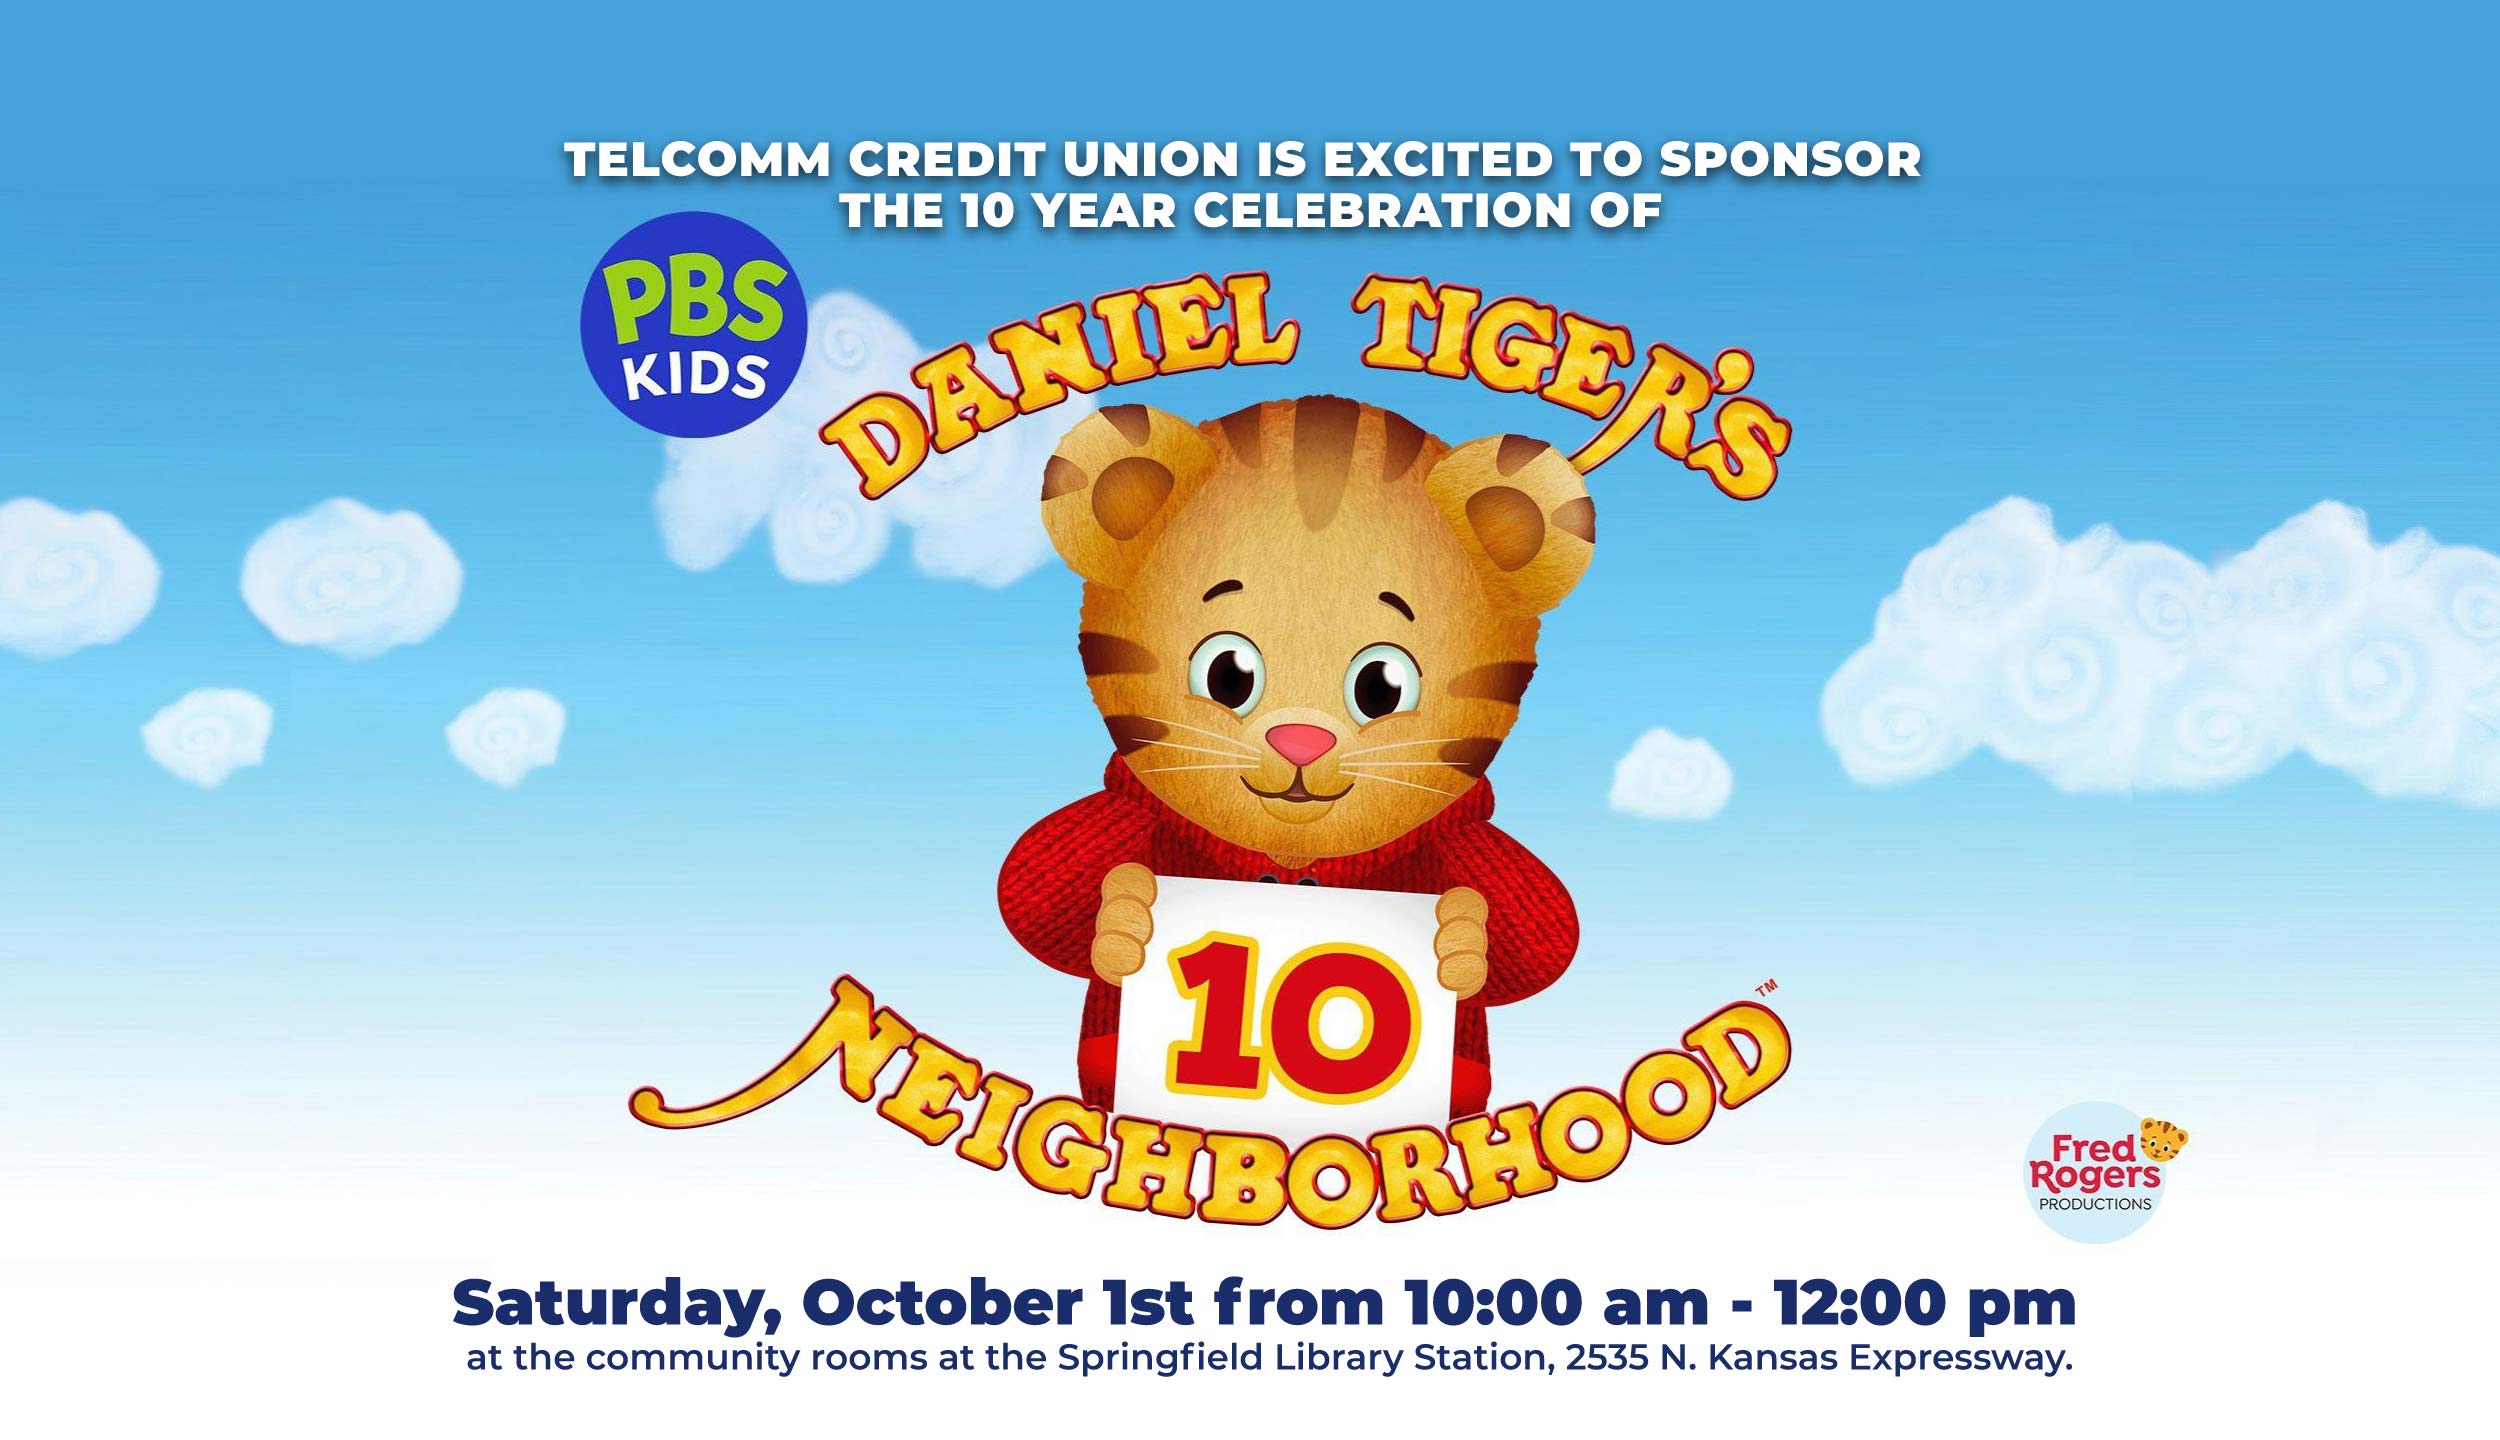 TelComm credit union is excited to sponsor the 10 year celebration of Daniel Tiger's Neighborhood